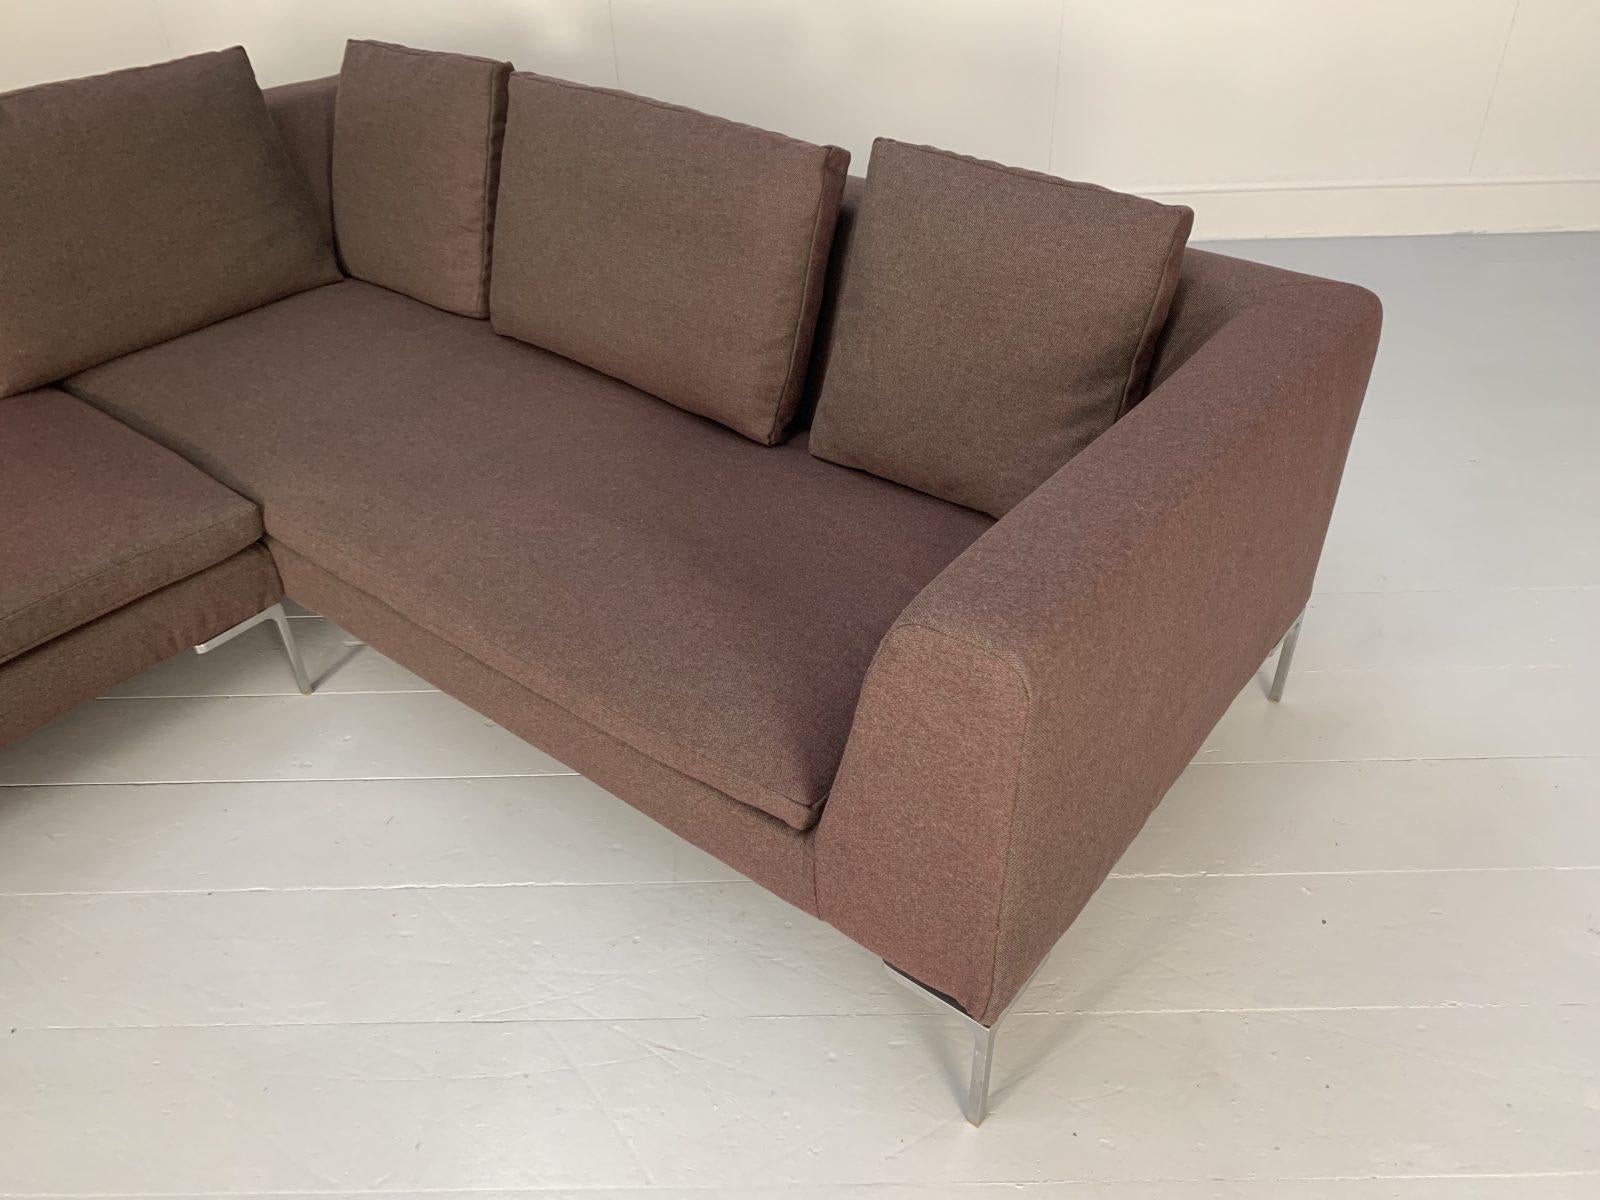 B&B Italia “Charles” Sofa, L-Shape Sectional, in Purple Wool In Good Condition For Sale In Barrowford, GB